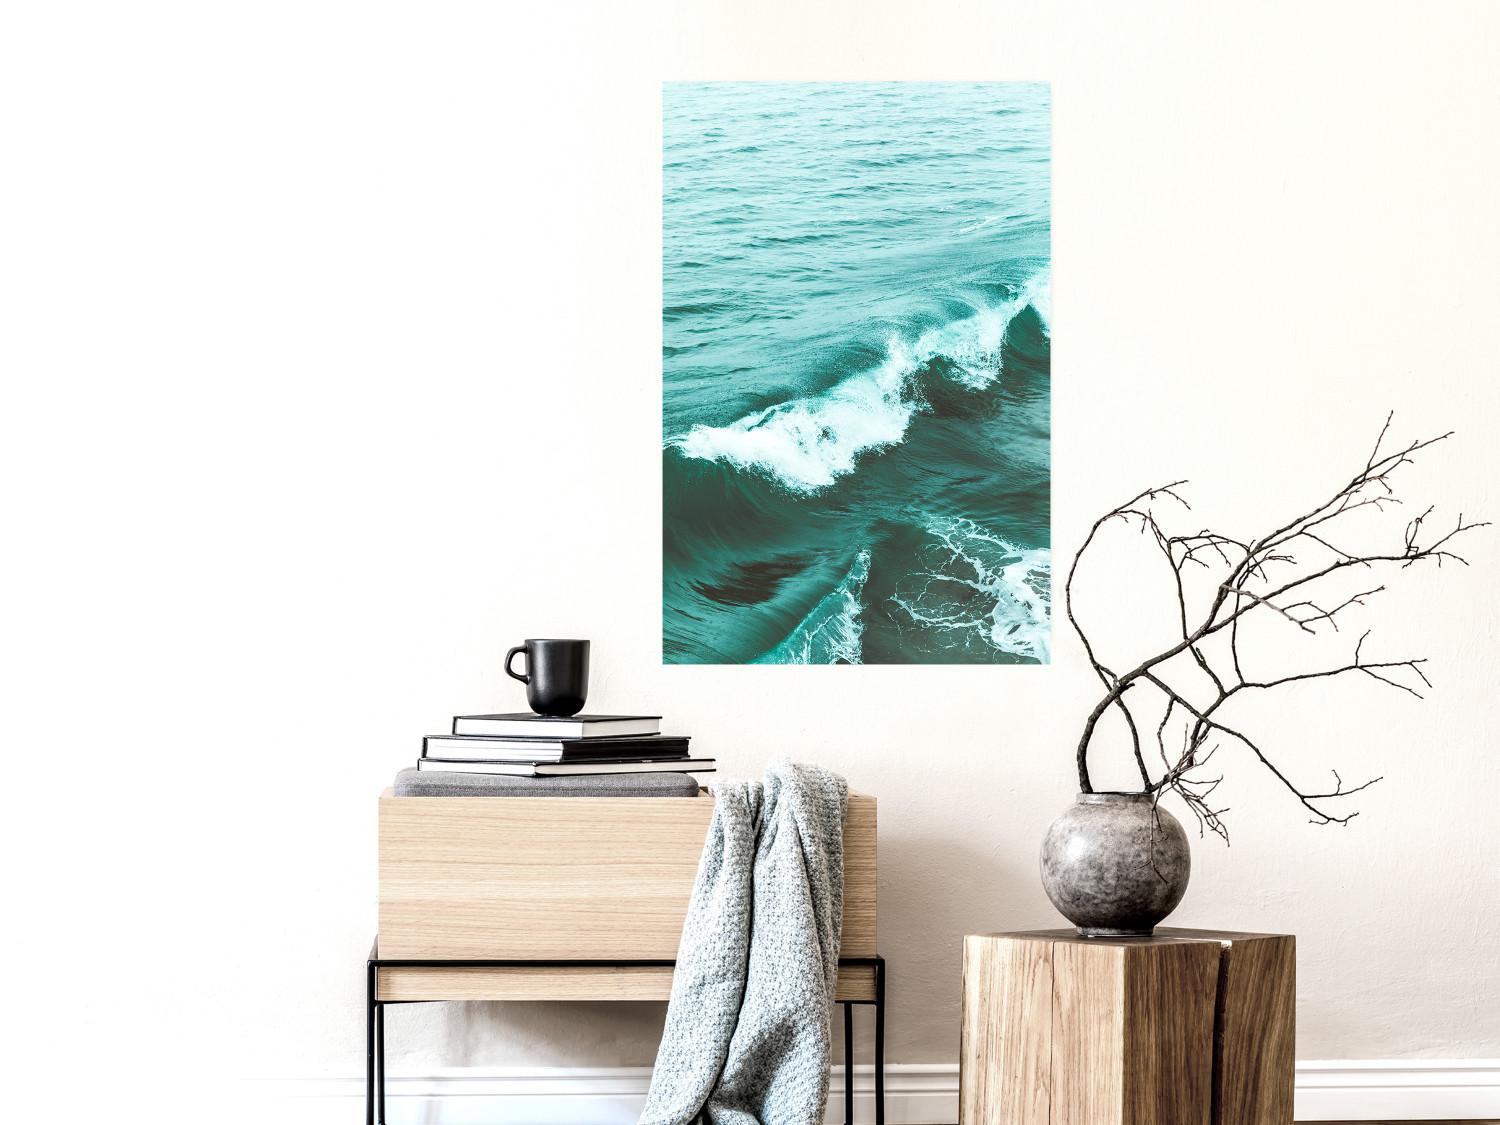 Poster Playful Wave - marine composition of turquoise water with small waves